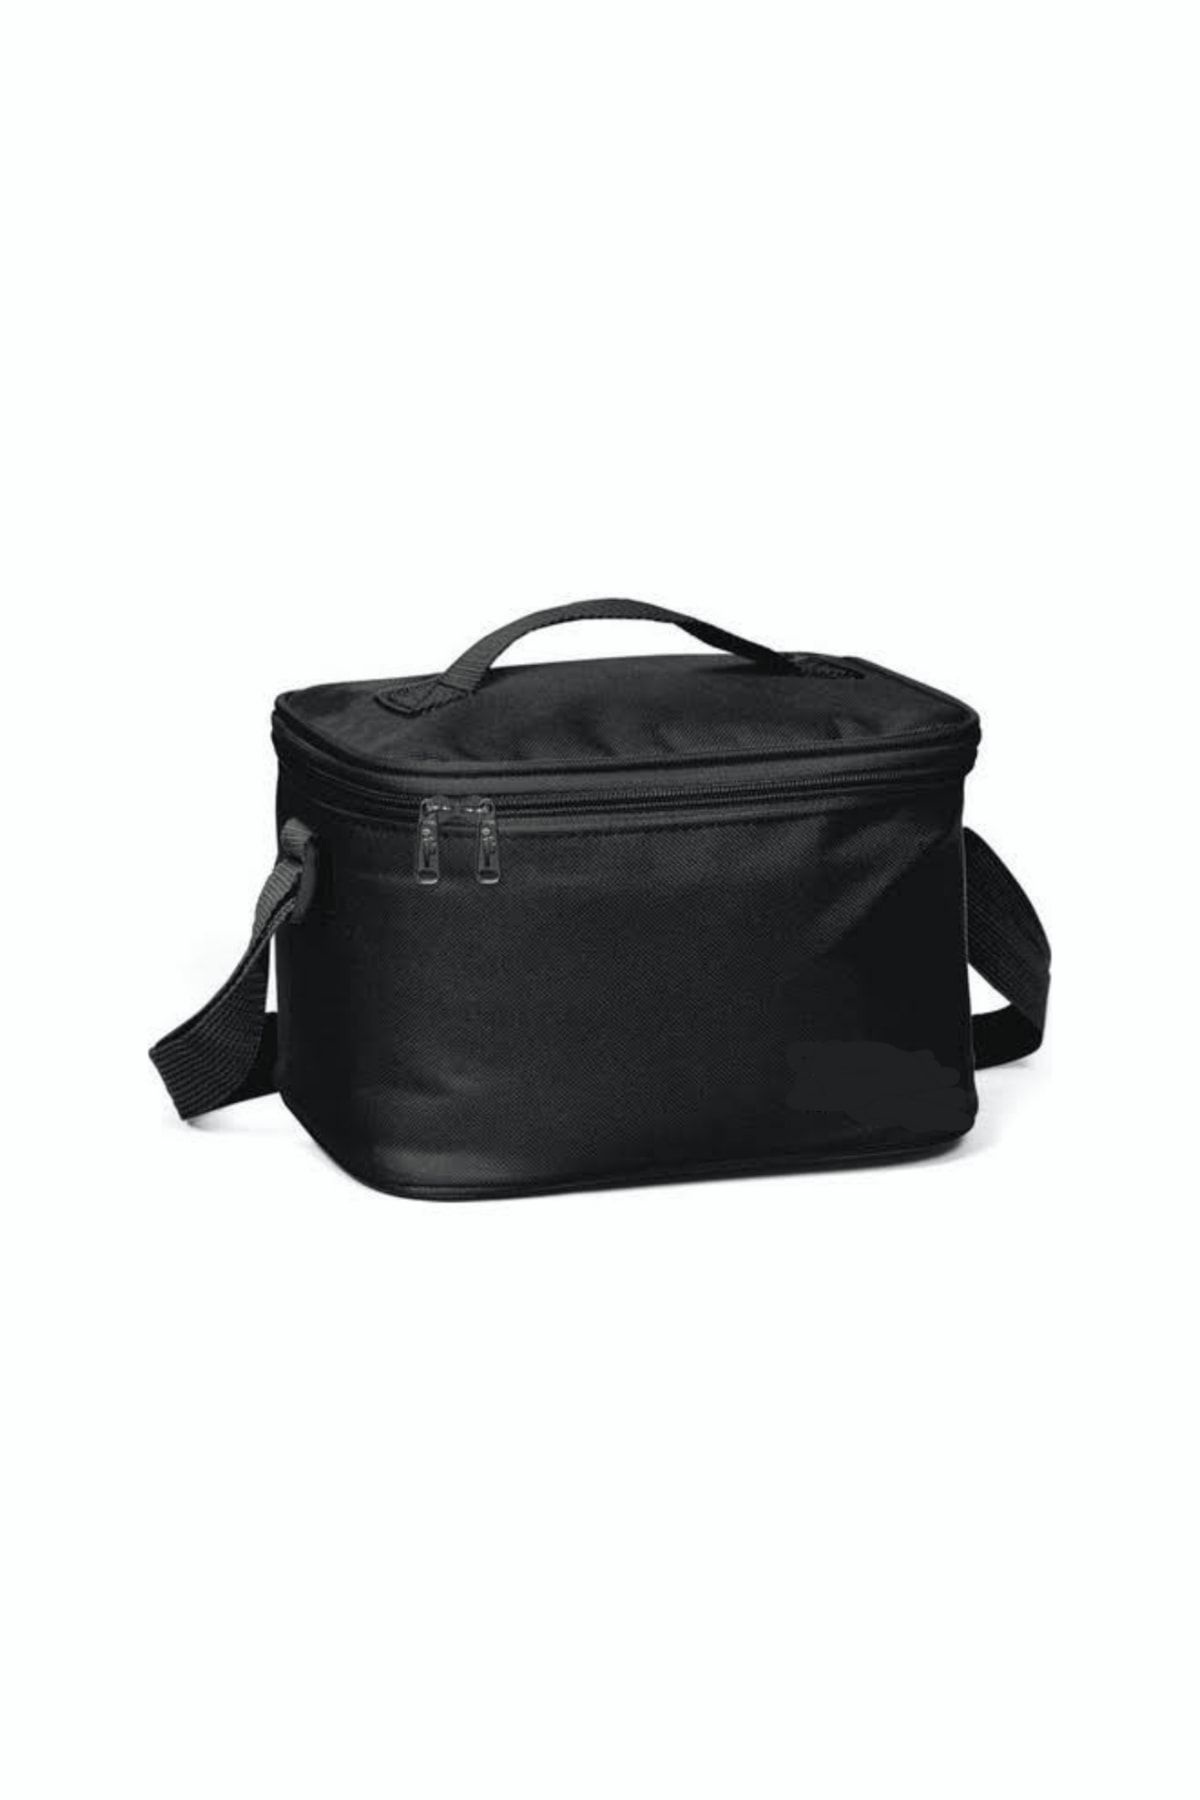 Thermos Lunch Bag – Black